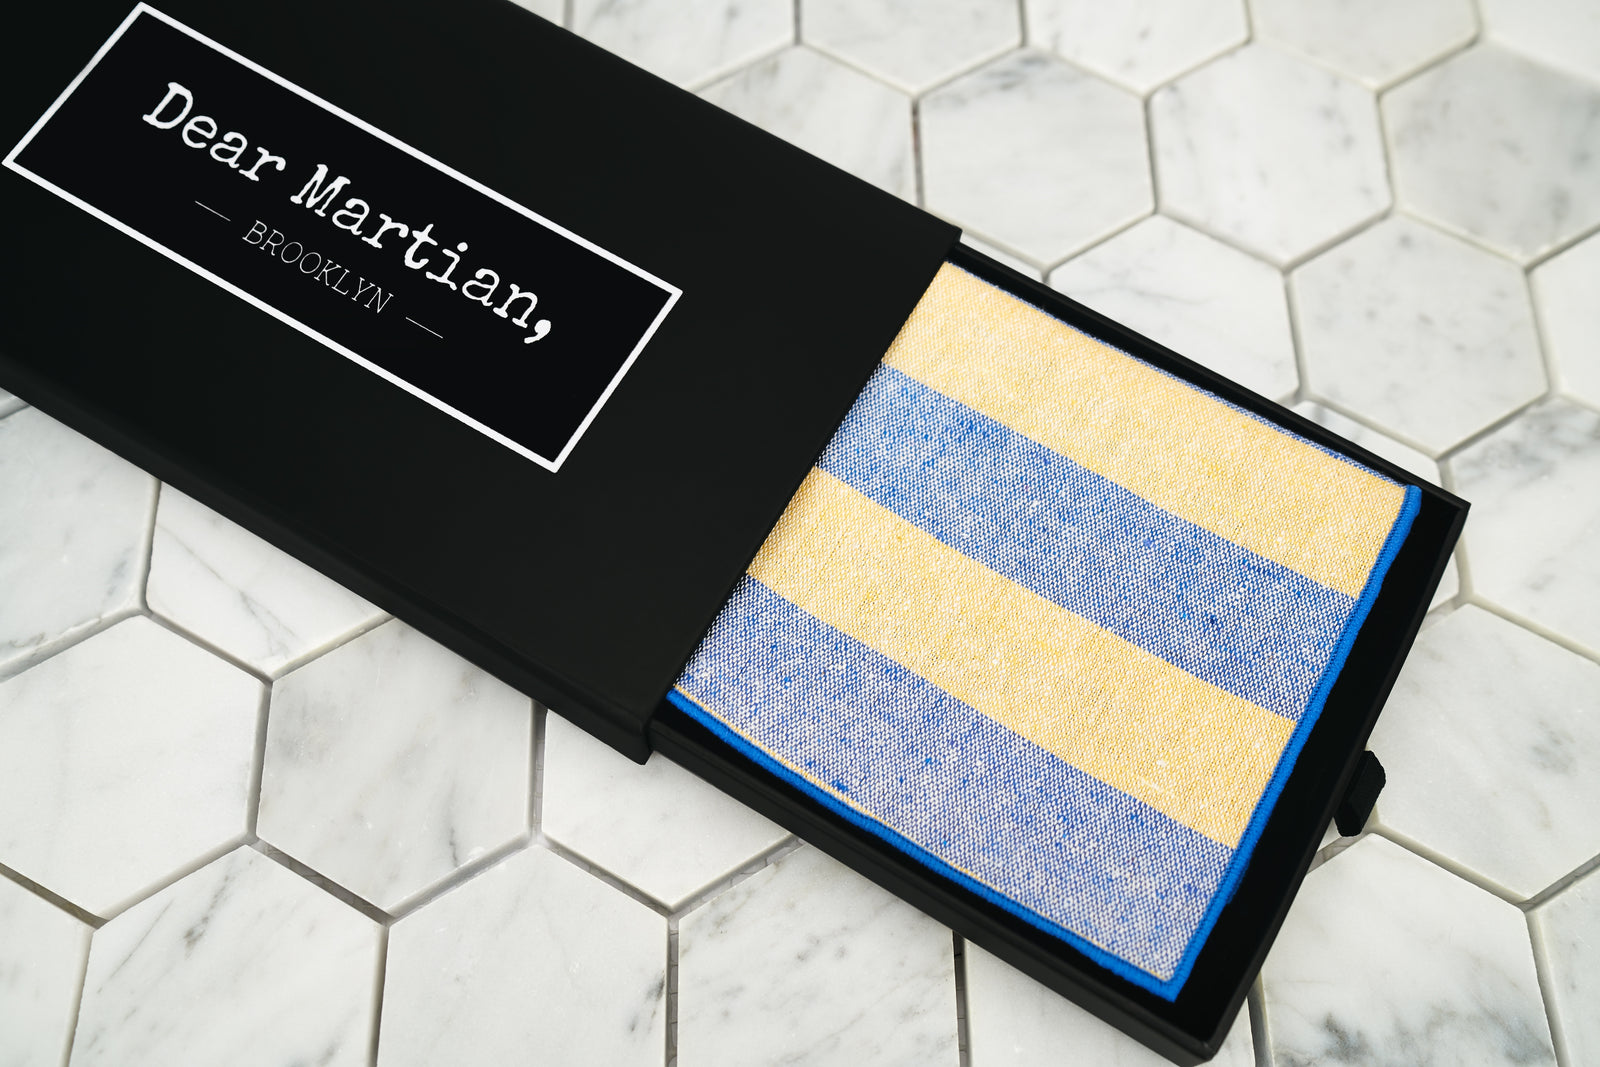 An image showing the Bookie yellow and blue striped pocketsquare. The matte black box features a pull out style with our Dear Martian, Brooklyn logo